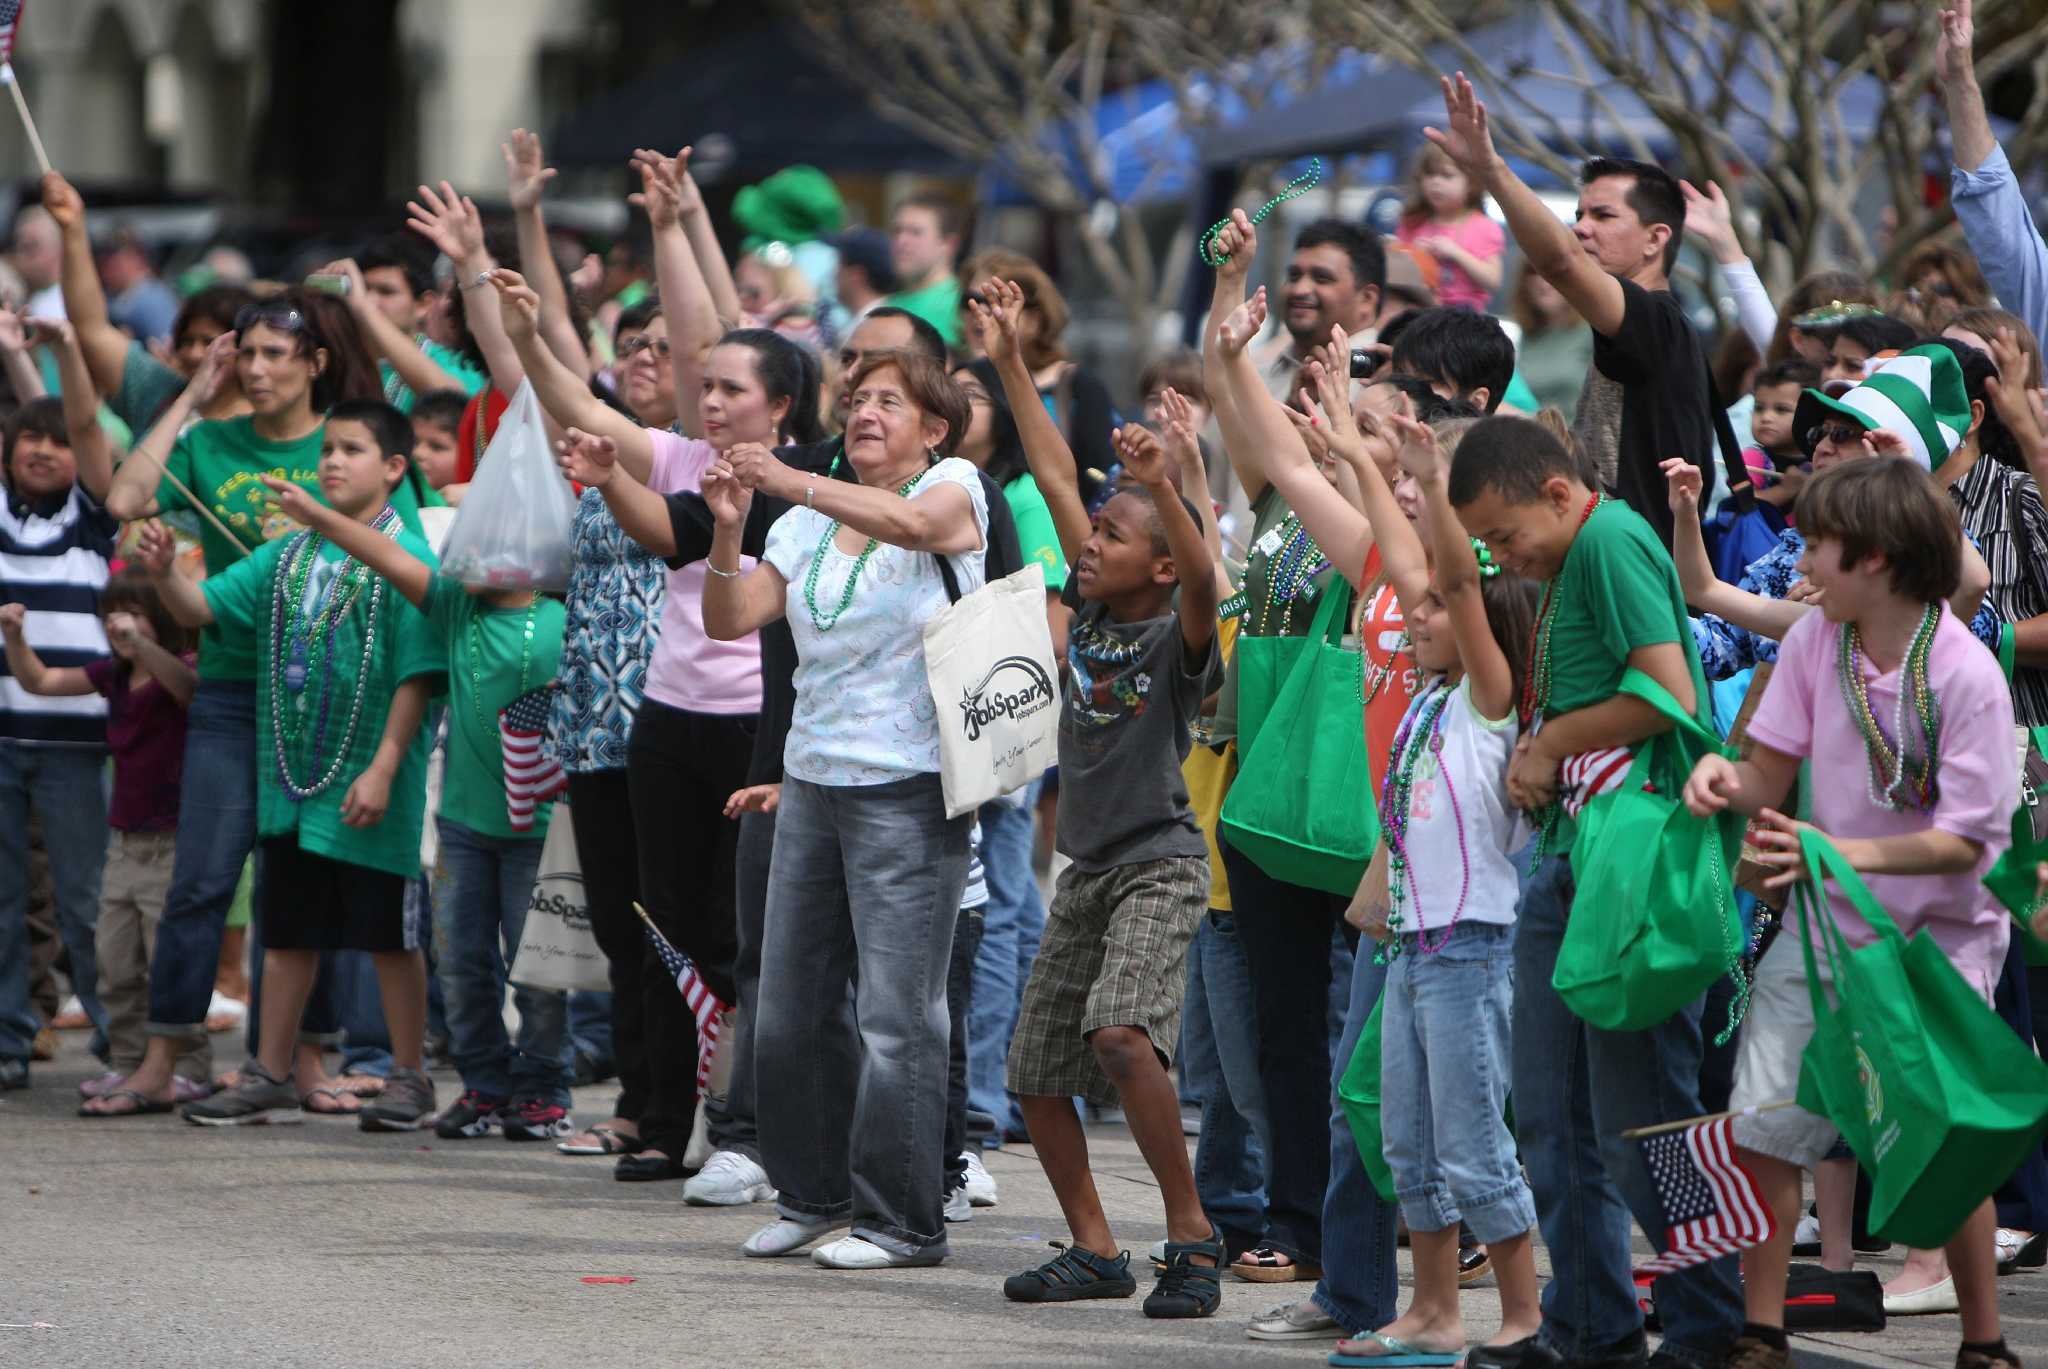 Big crowds expected for FM 1960 St. Patrick's Day Parade